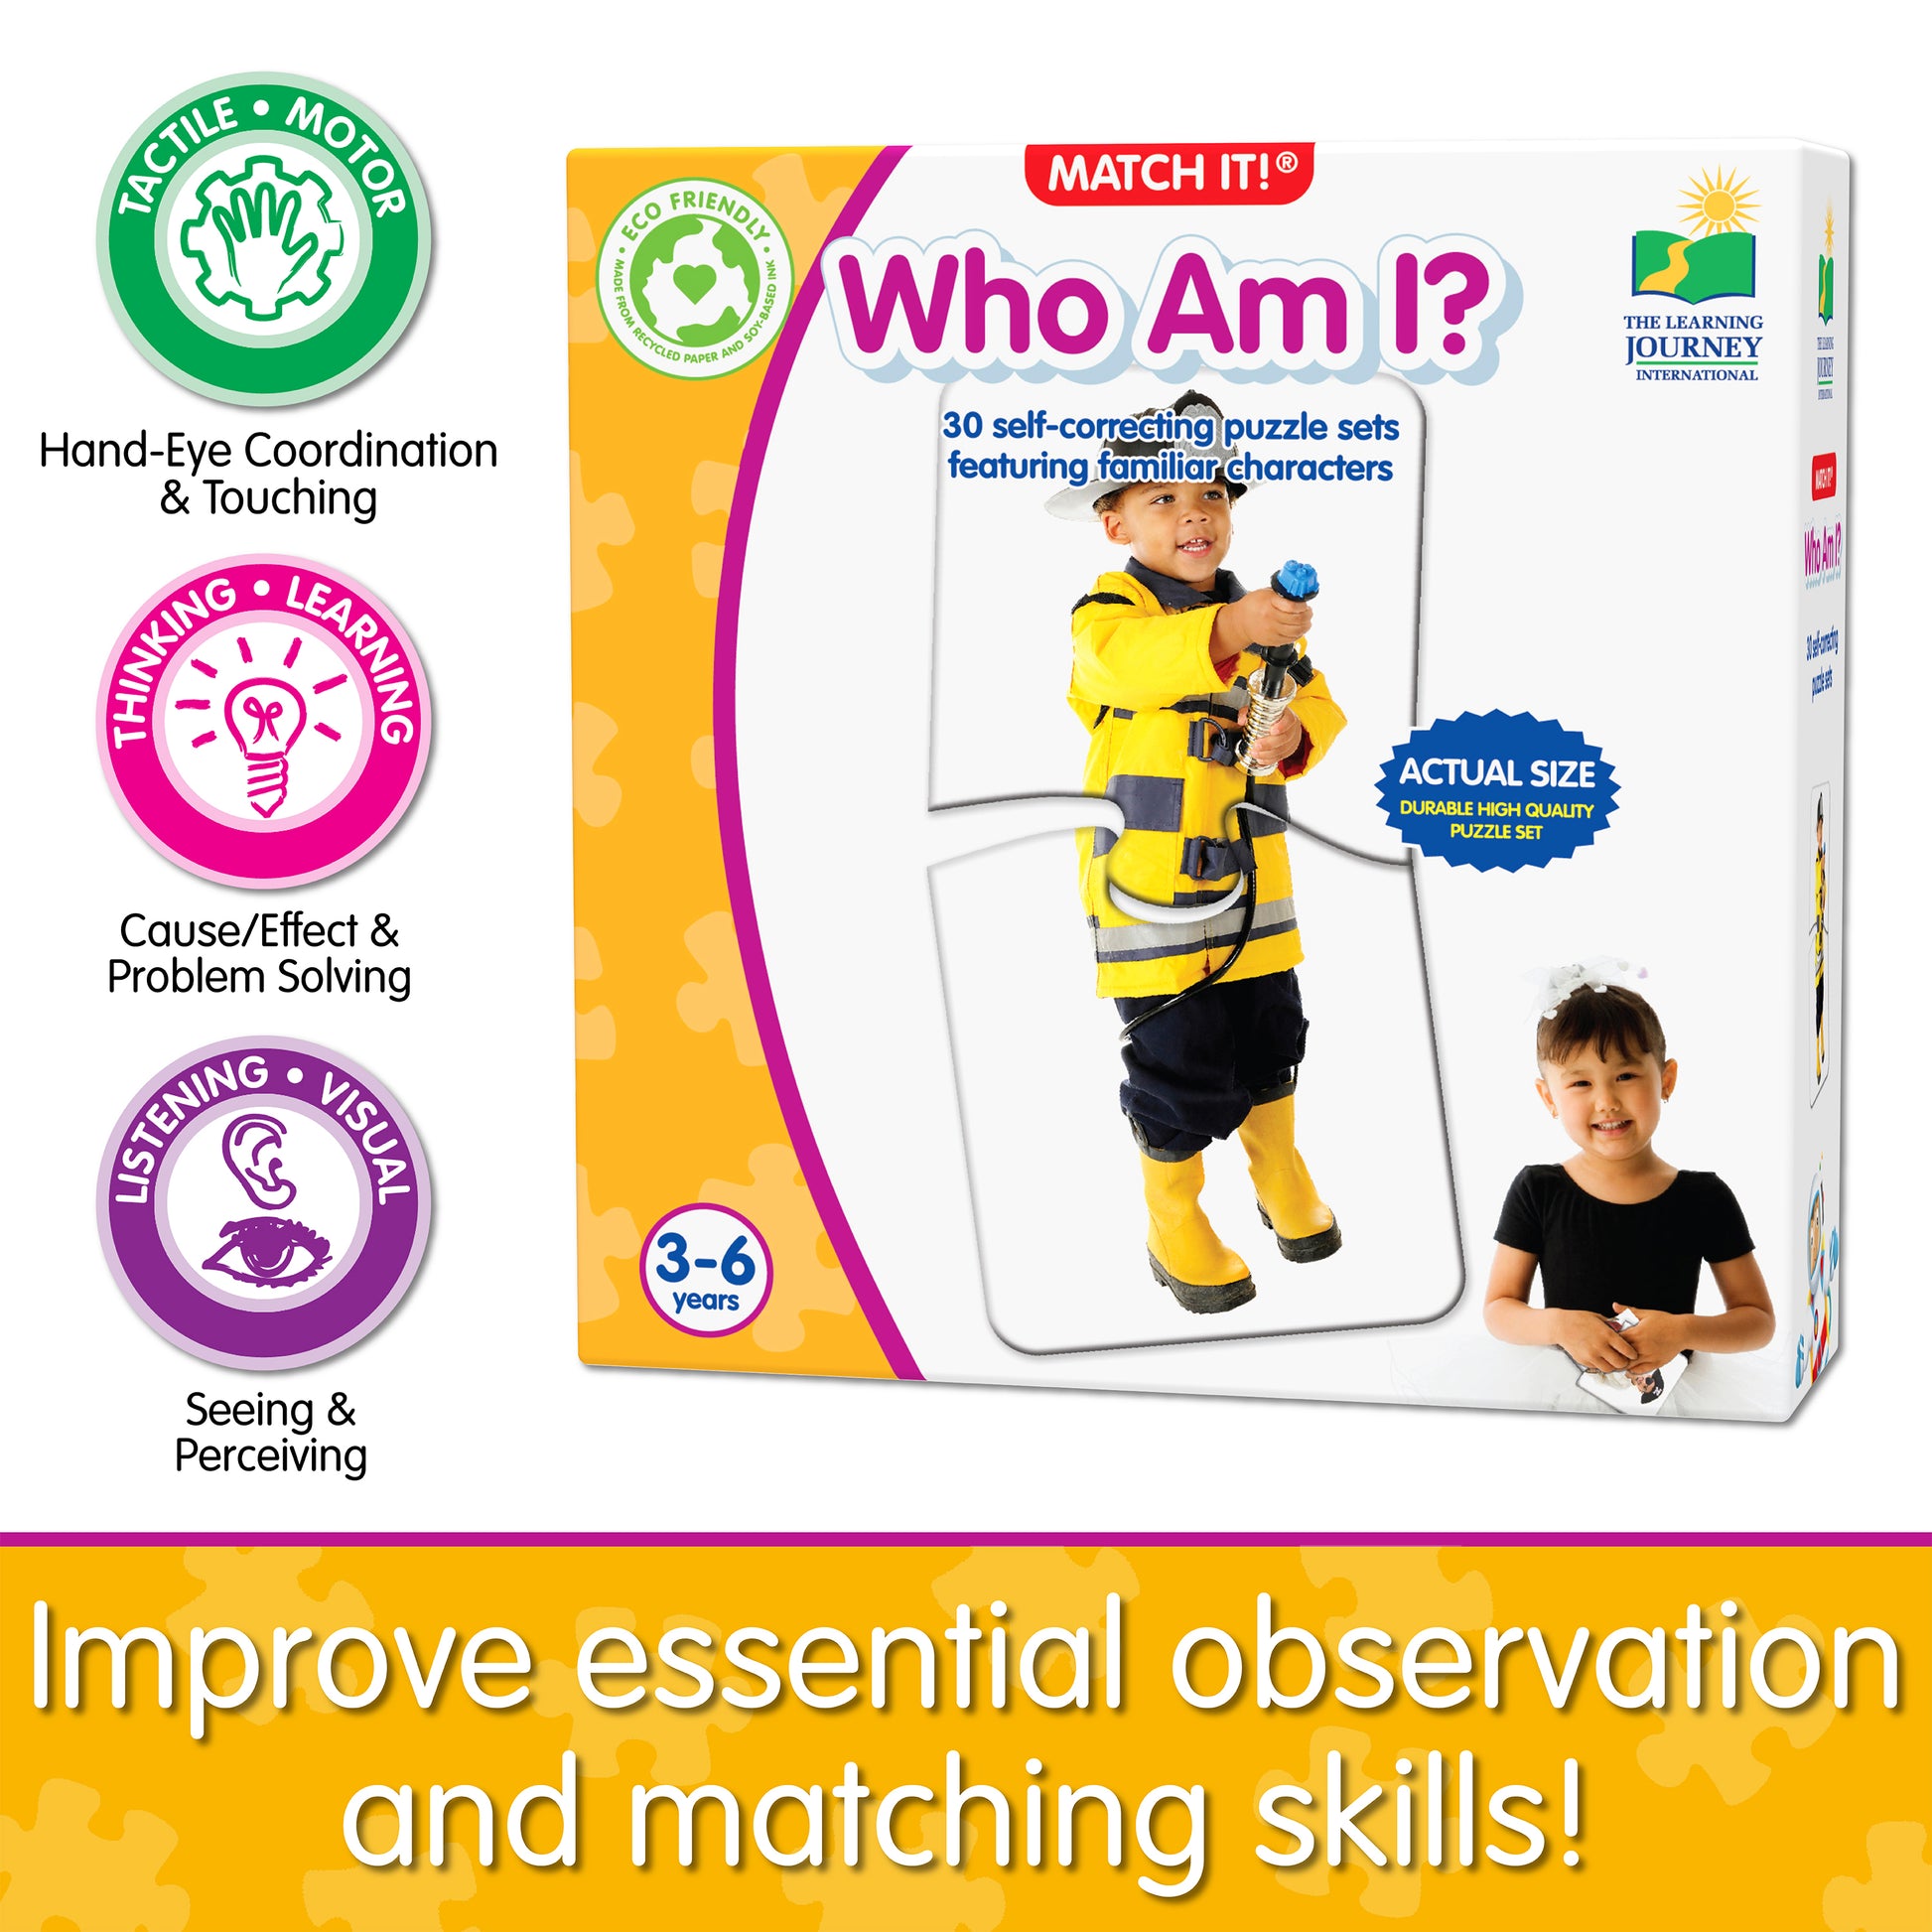 Infographic about Match It - Who Am I's educational benefits that says, "Improve essential observation and matching skills!"